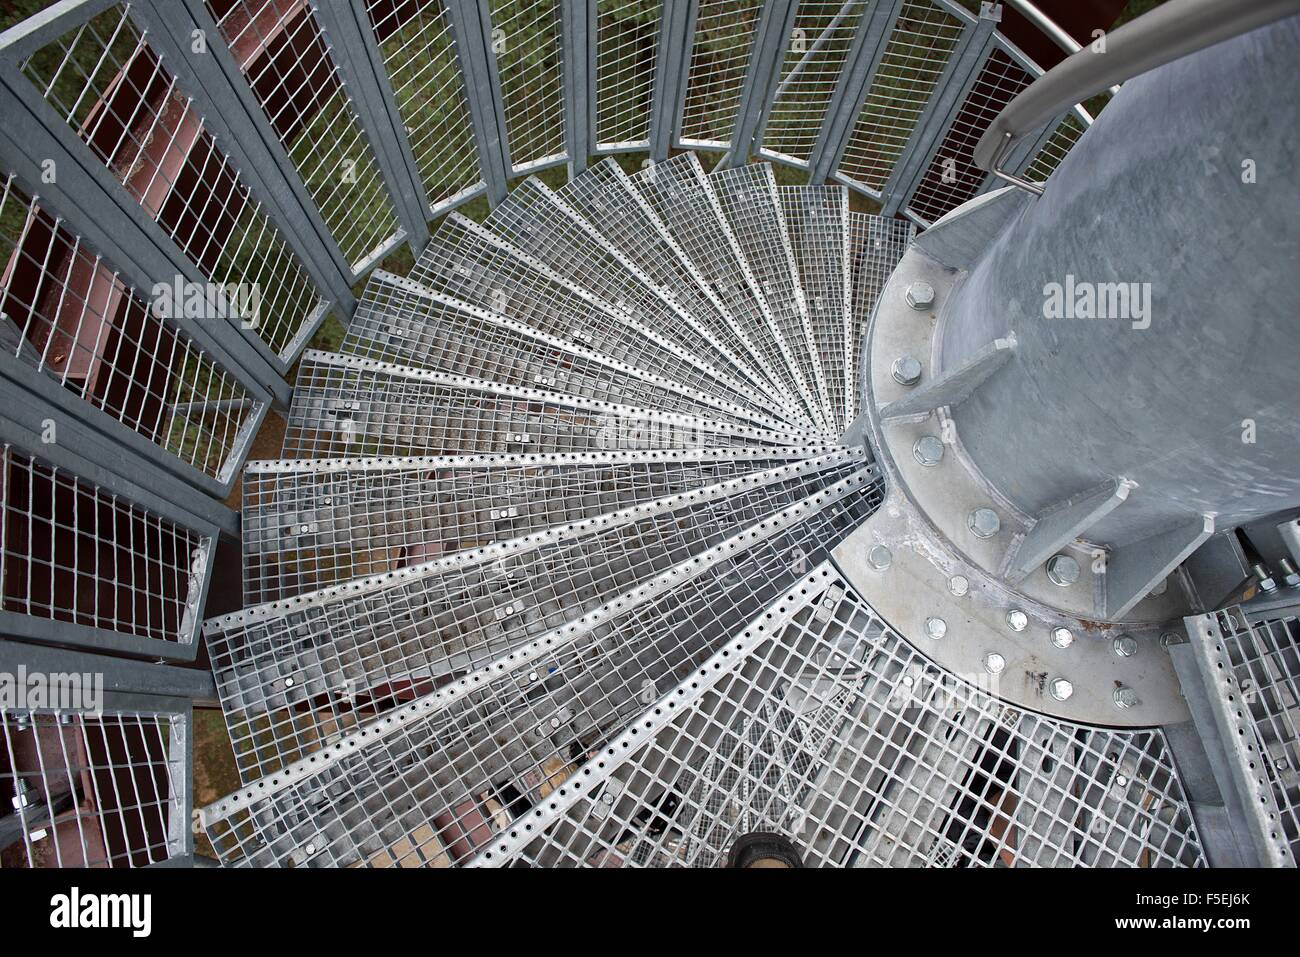 Personal perspective of a Metal spiral staircase Stock Photo